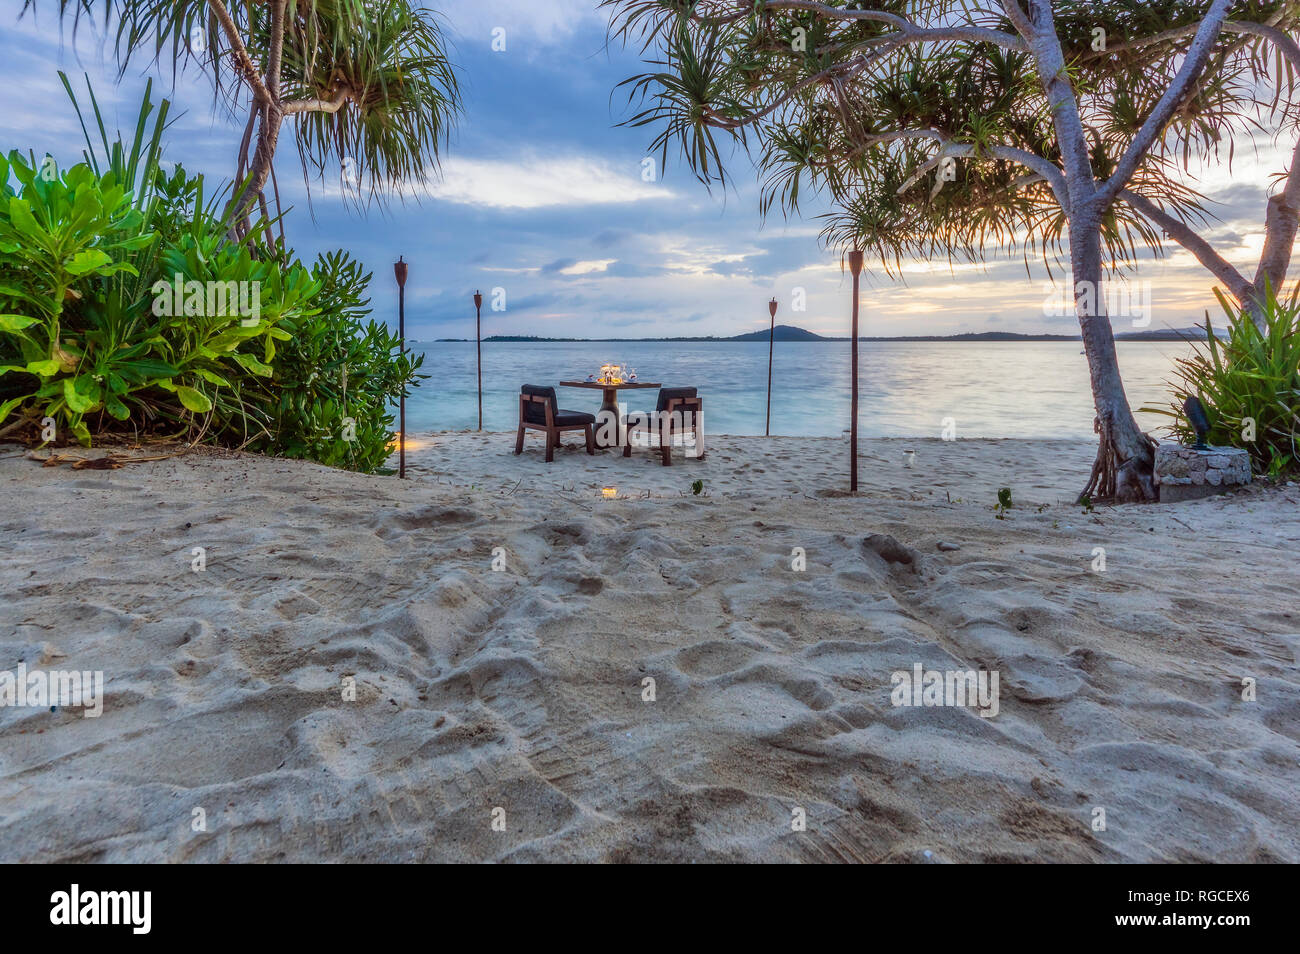 Indonesia, Riau Islands, Bintan, table at the beach in the evening Stock Photo